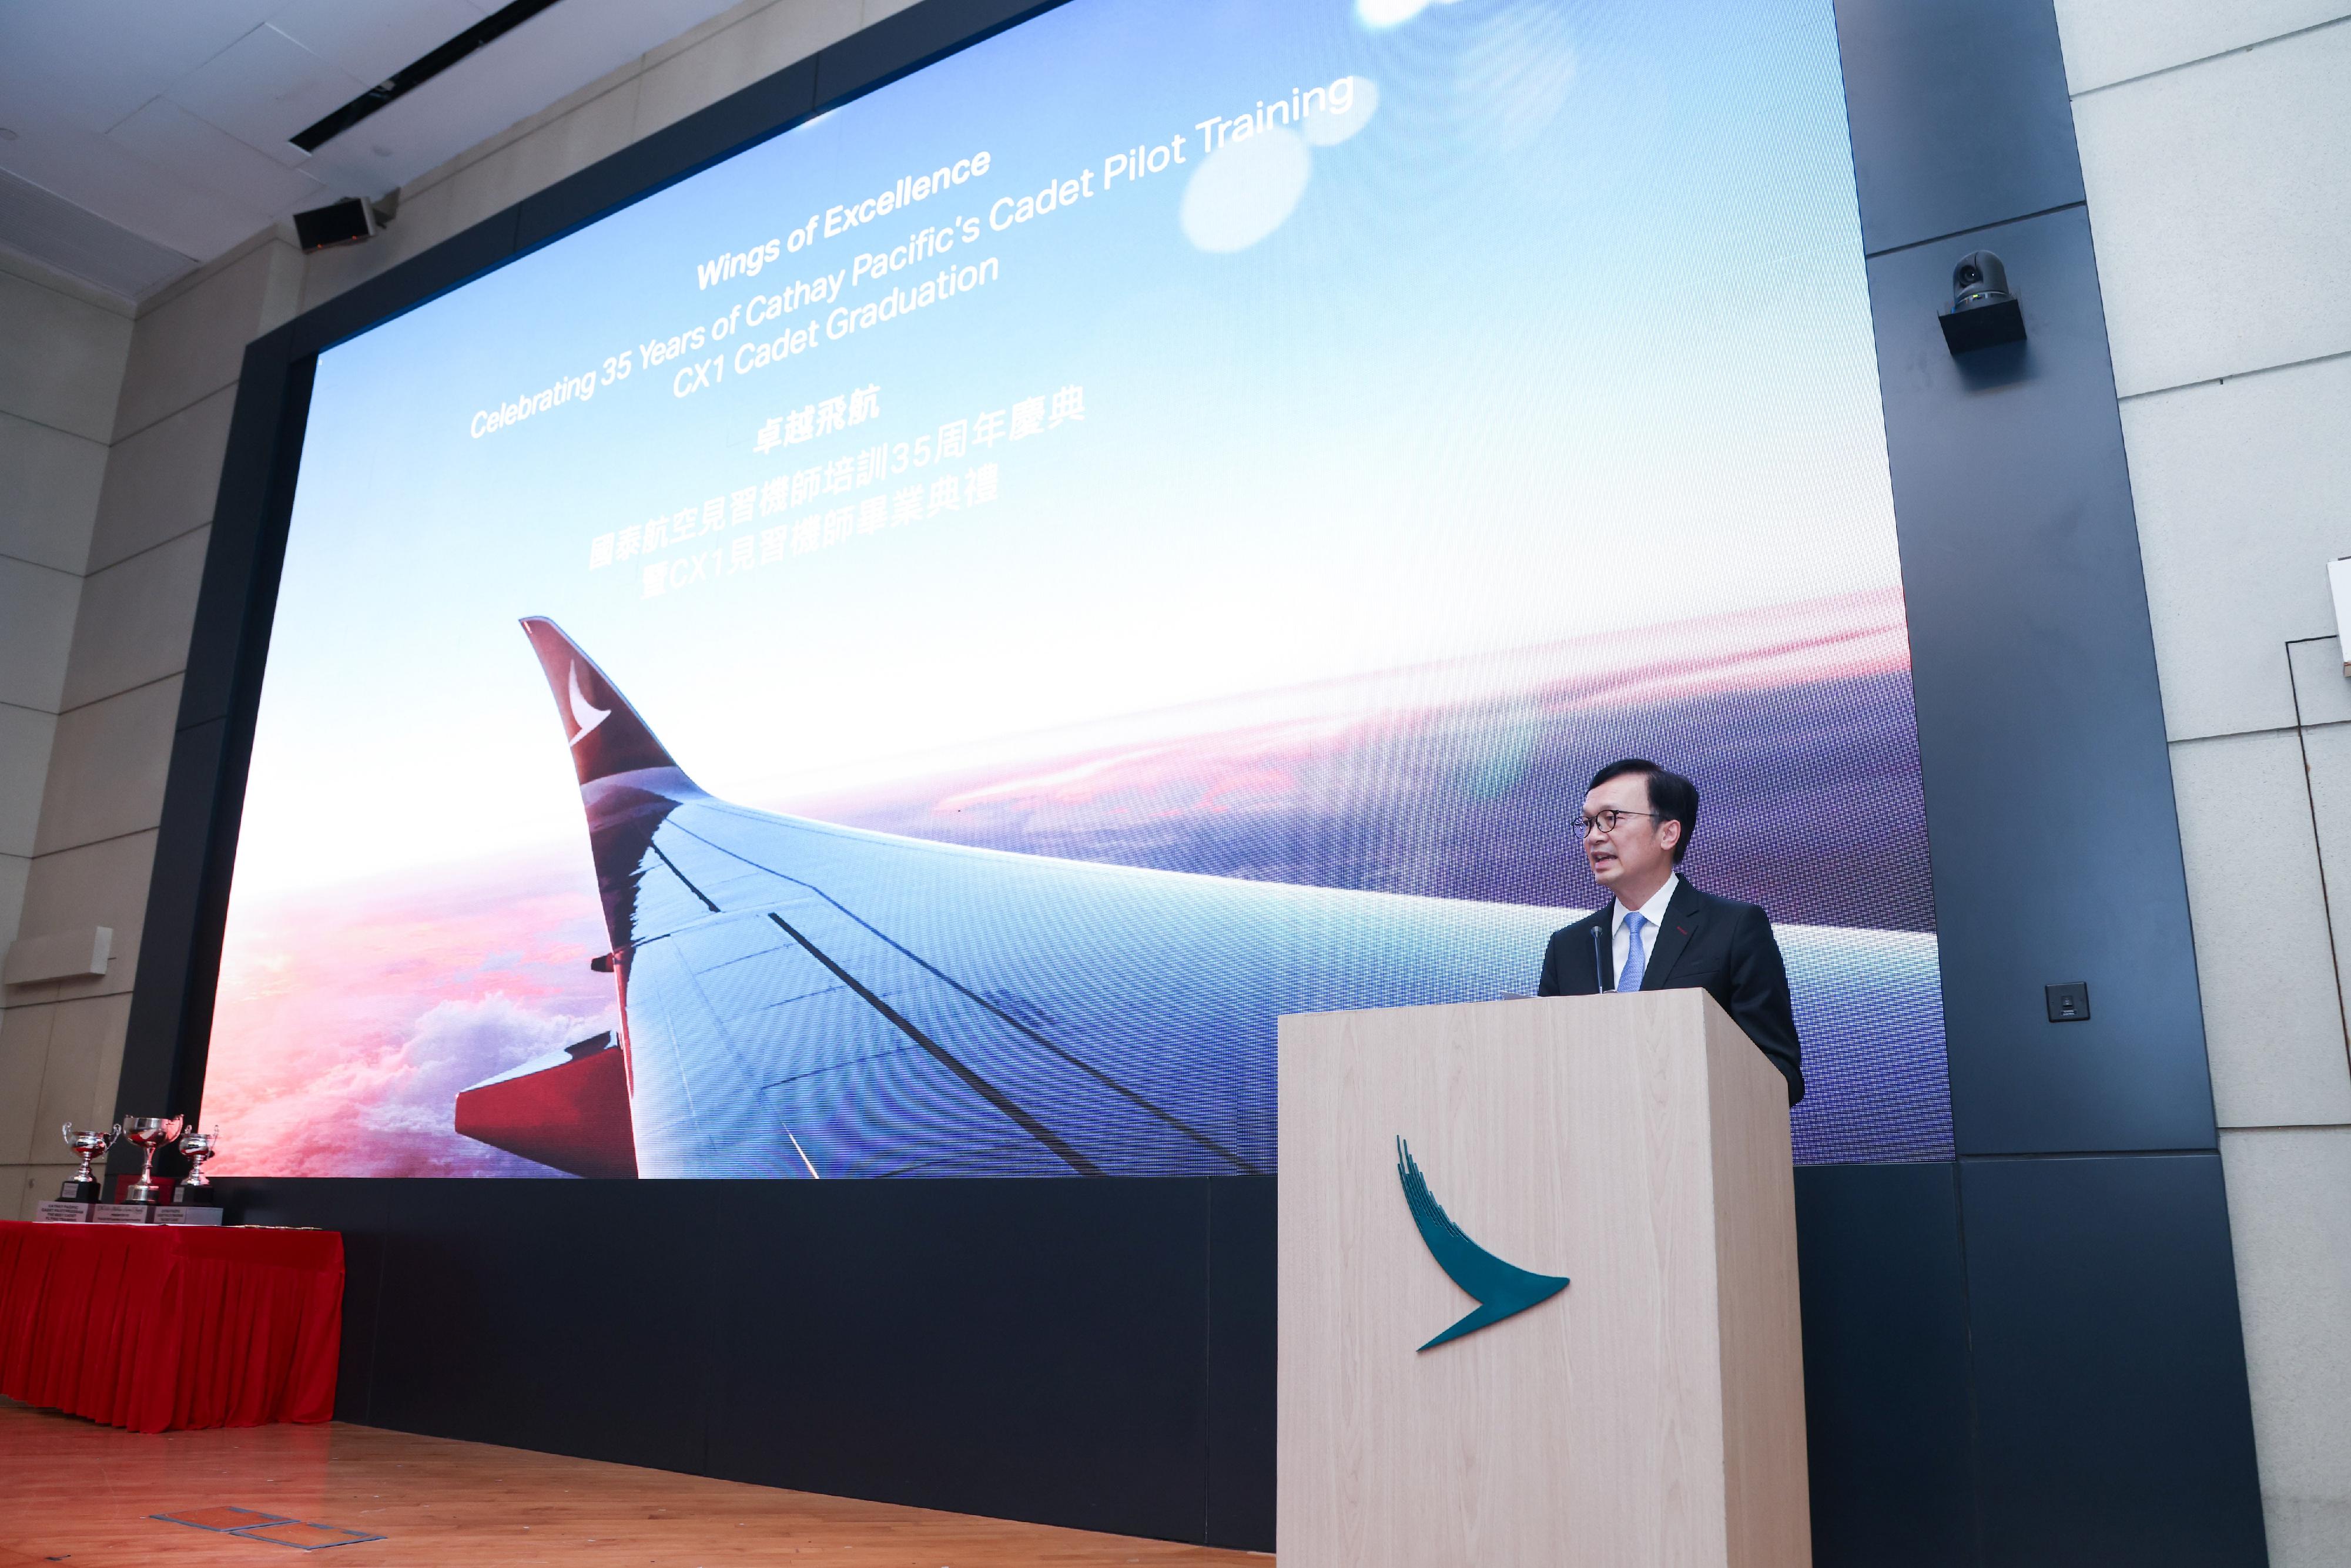 The Acting Secretary for Transport and Logistics, Mr Liu Chun-san, delivers a speech at the Cathay Pacific Cadet Pilot Programme graduation ceremony today (December 5).